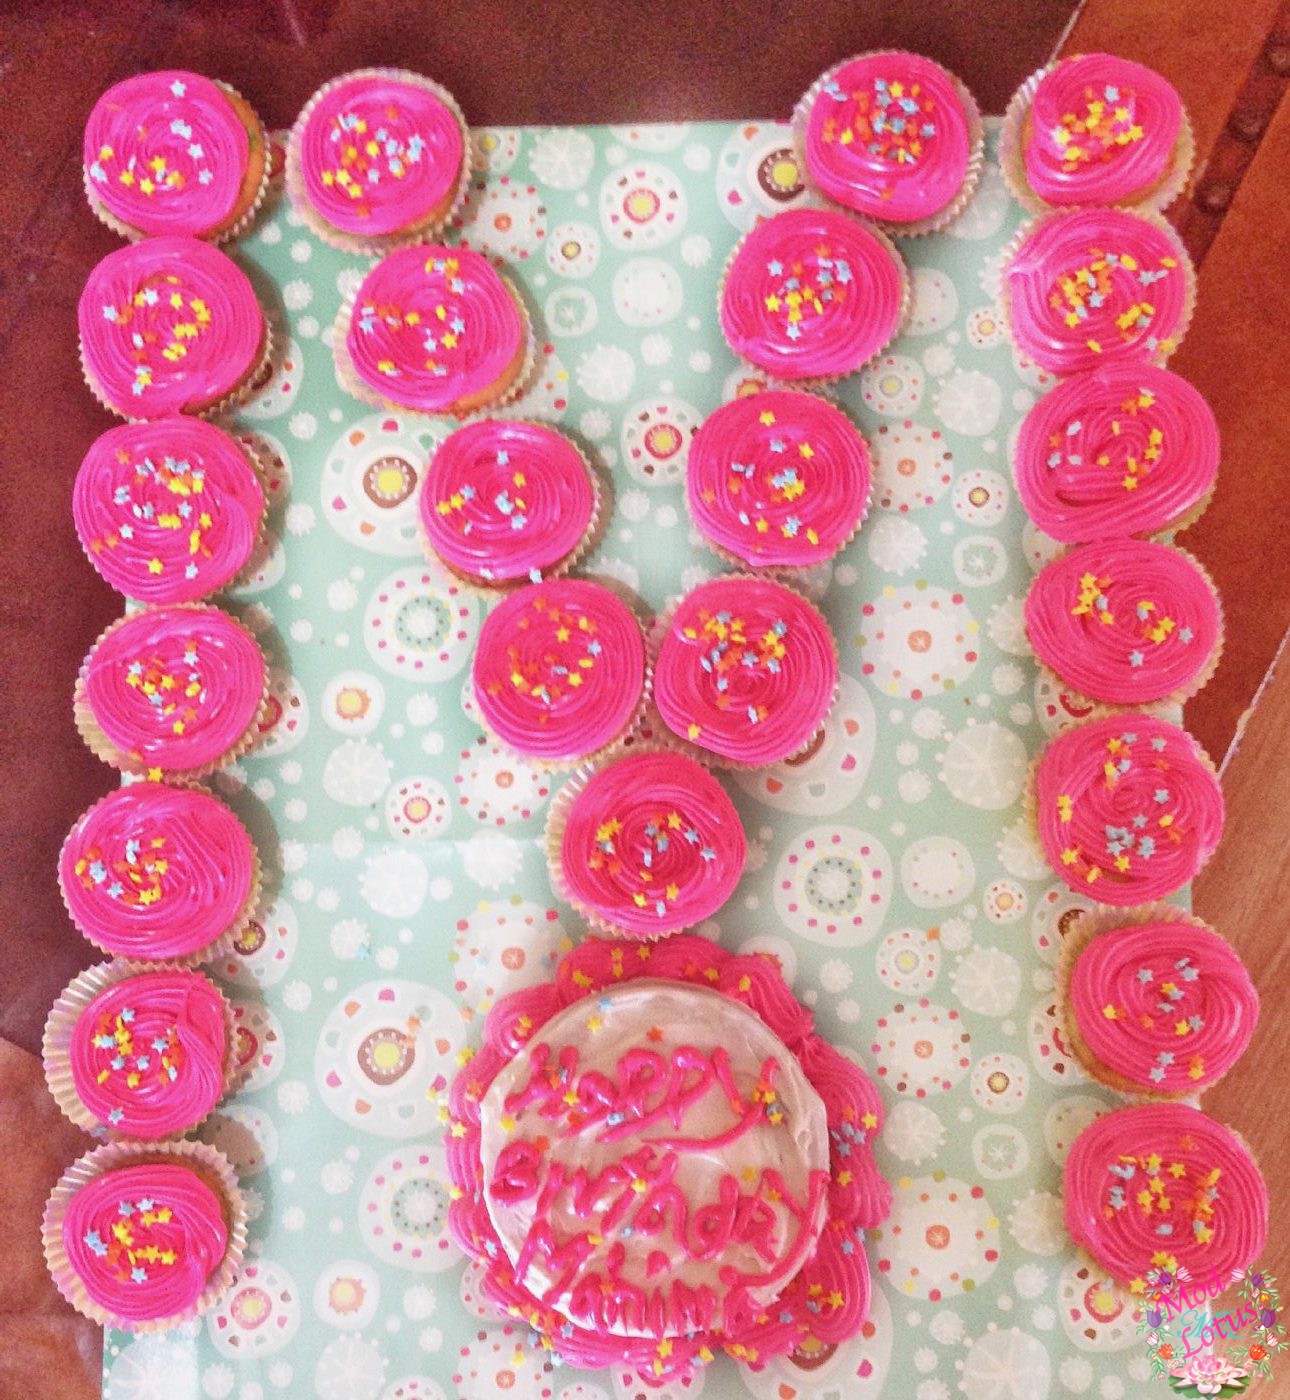 super easy decorated cupcakes birthday with petal tip and star tip creative birthday cake within cupcakes